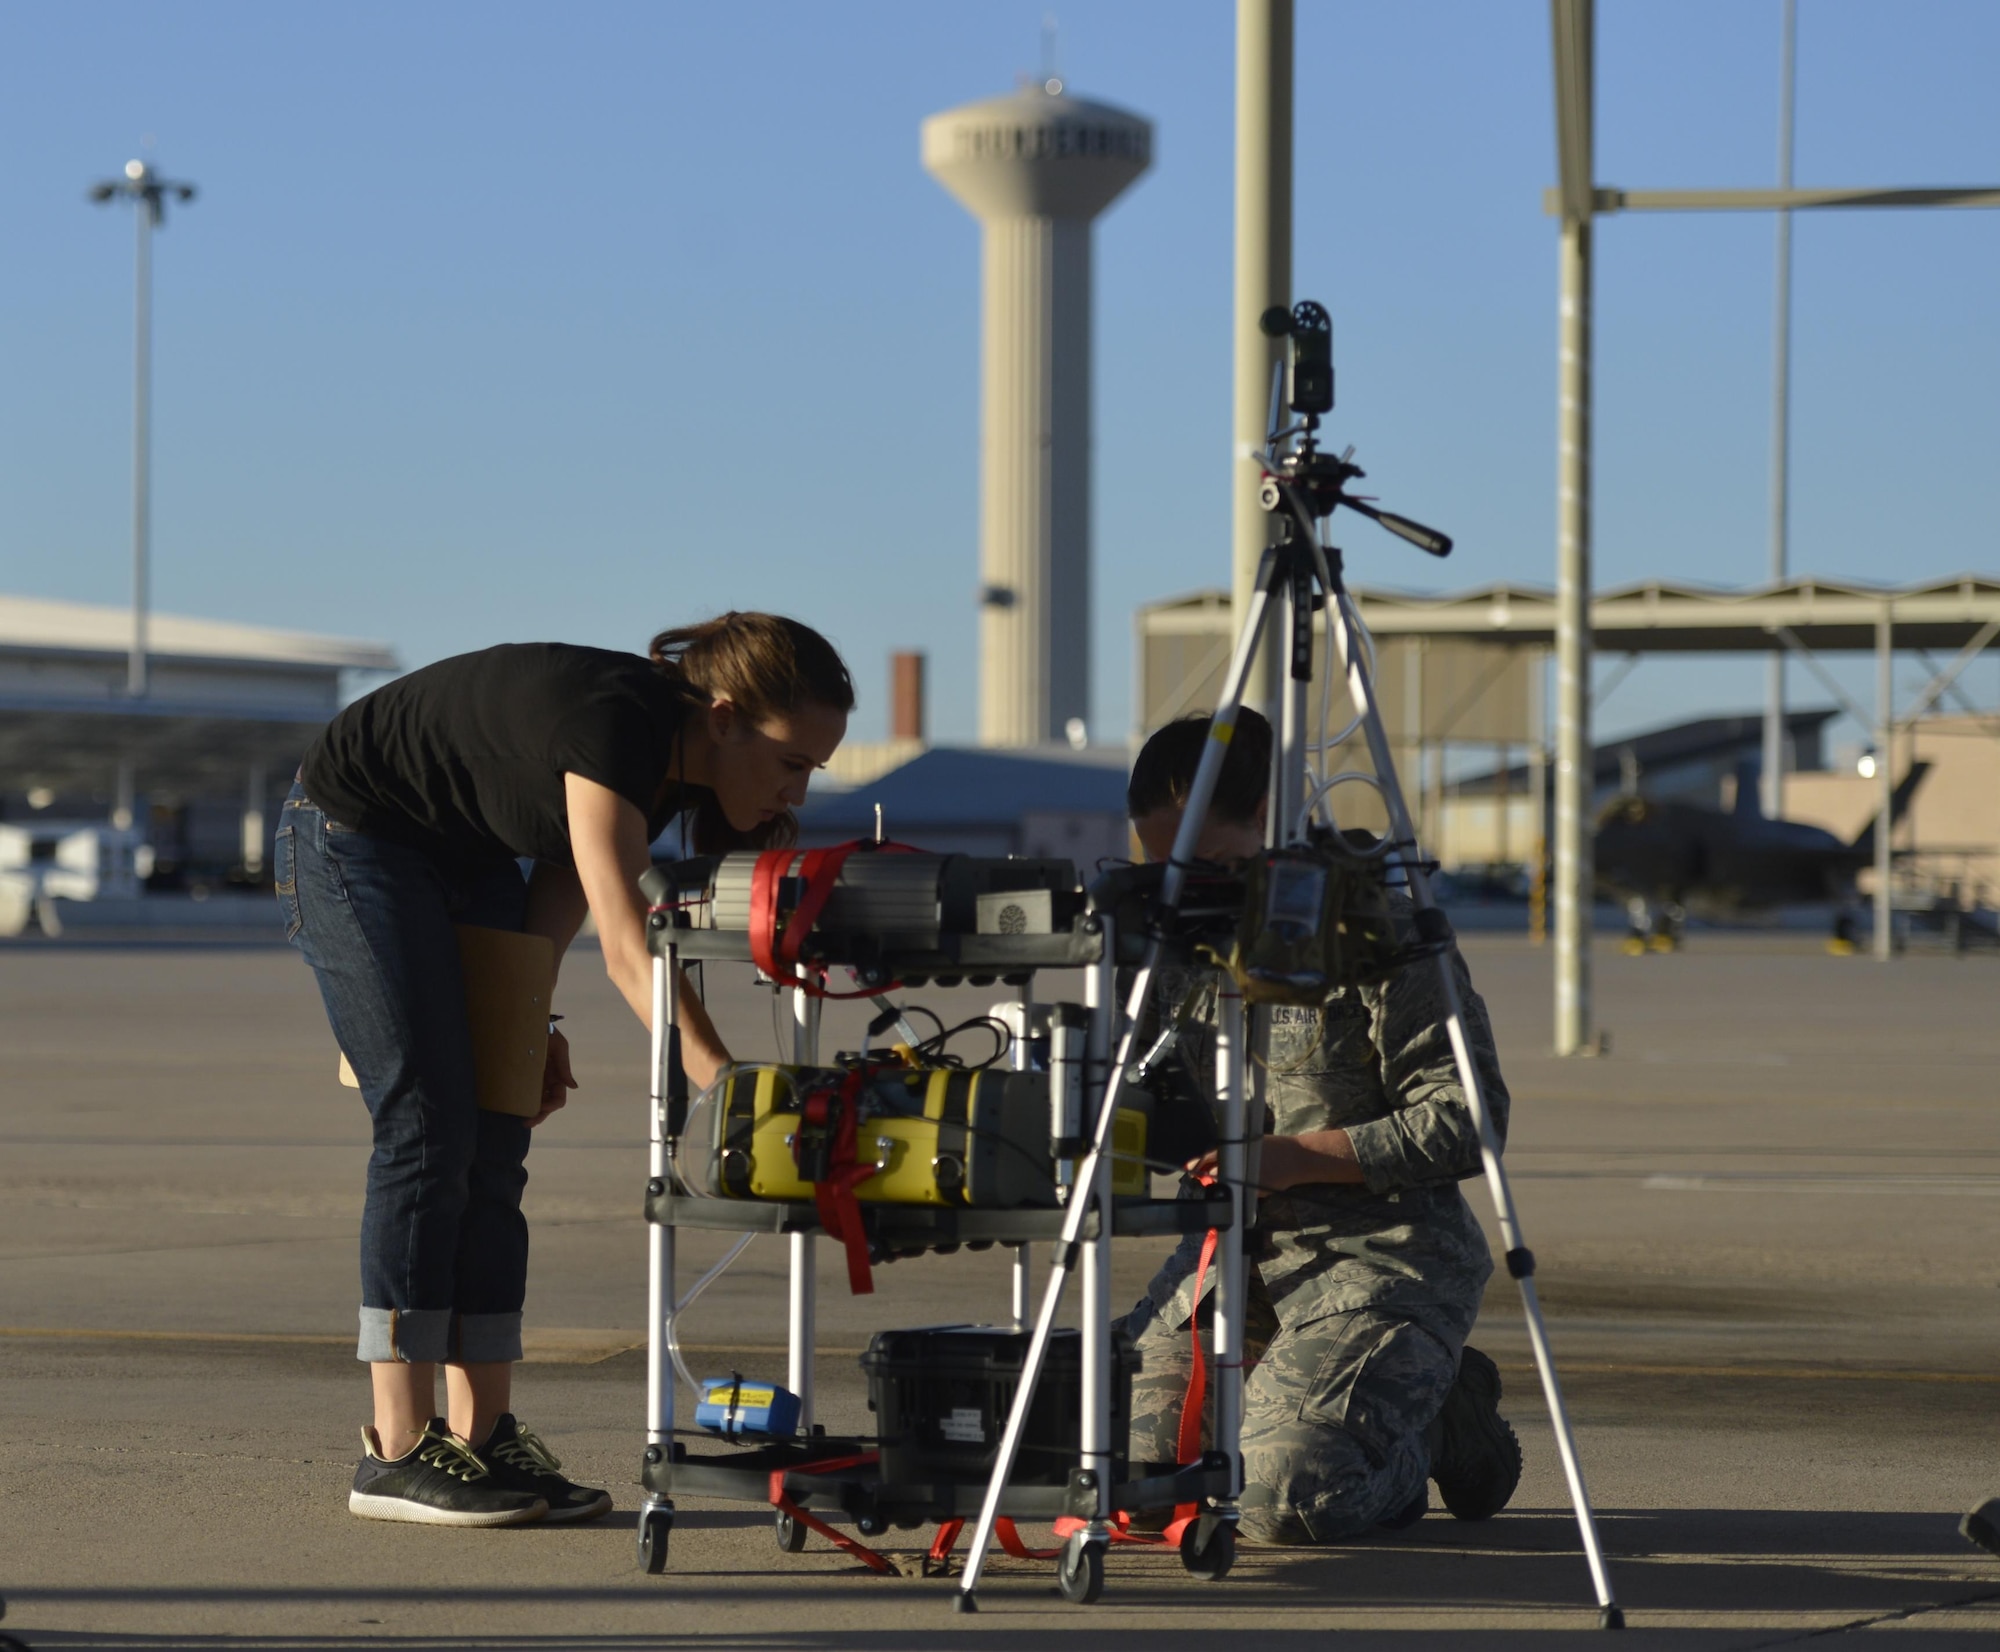 Danielle McKenzie-Smith, USAF School of Aerospace Medicine bioenvironmental engineer secures testing equipment on the flightline at Luke Air Force Base, Ariz., Sept. 20, 2017. McKenzie-Smith and the team strategically placed equipment to test chemicals, particle sizes and the distribution of particles in the air related  to the F-35A Lightning II program.  (U.S. Air Force photo/Airman 1st Class Caleb Worpel)